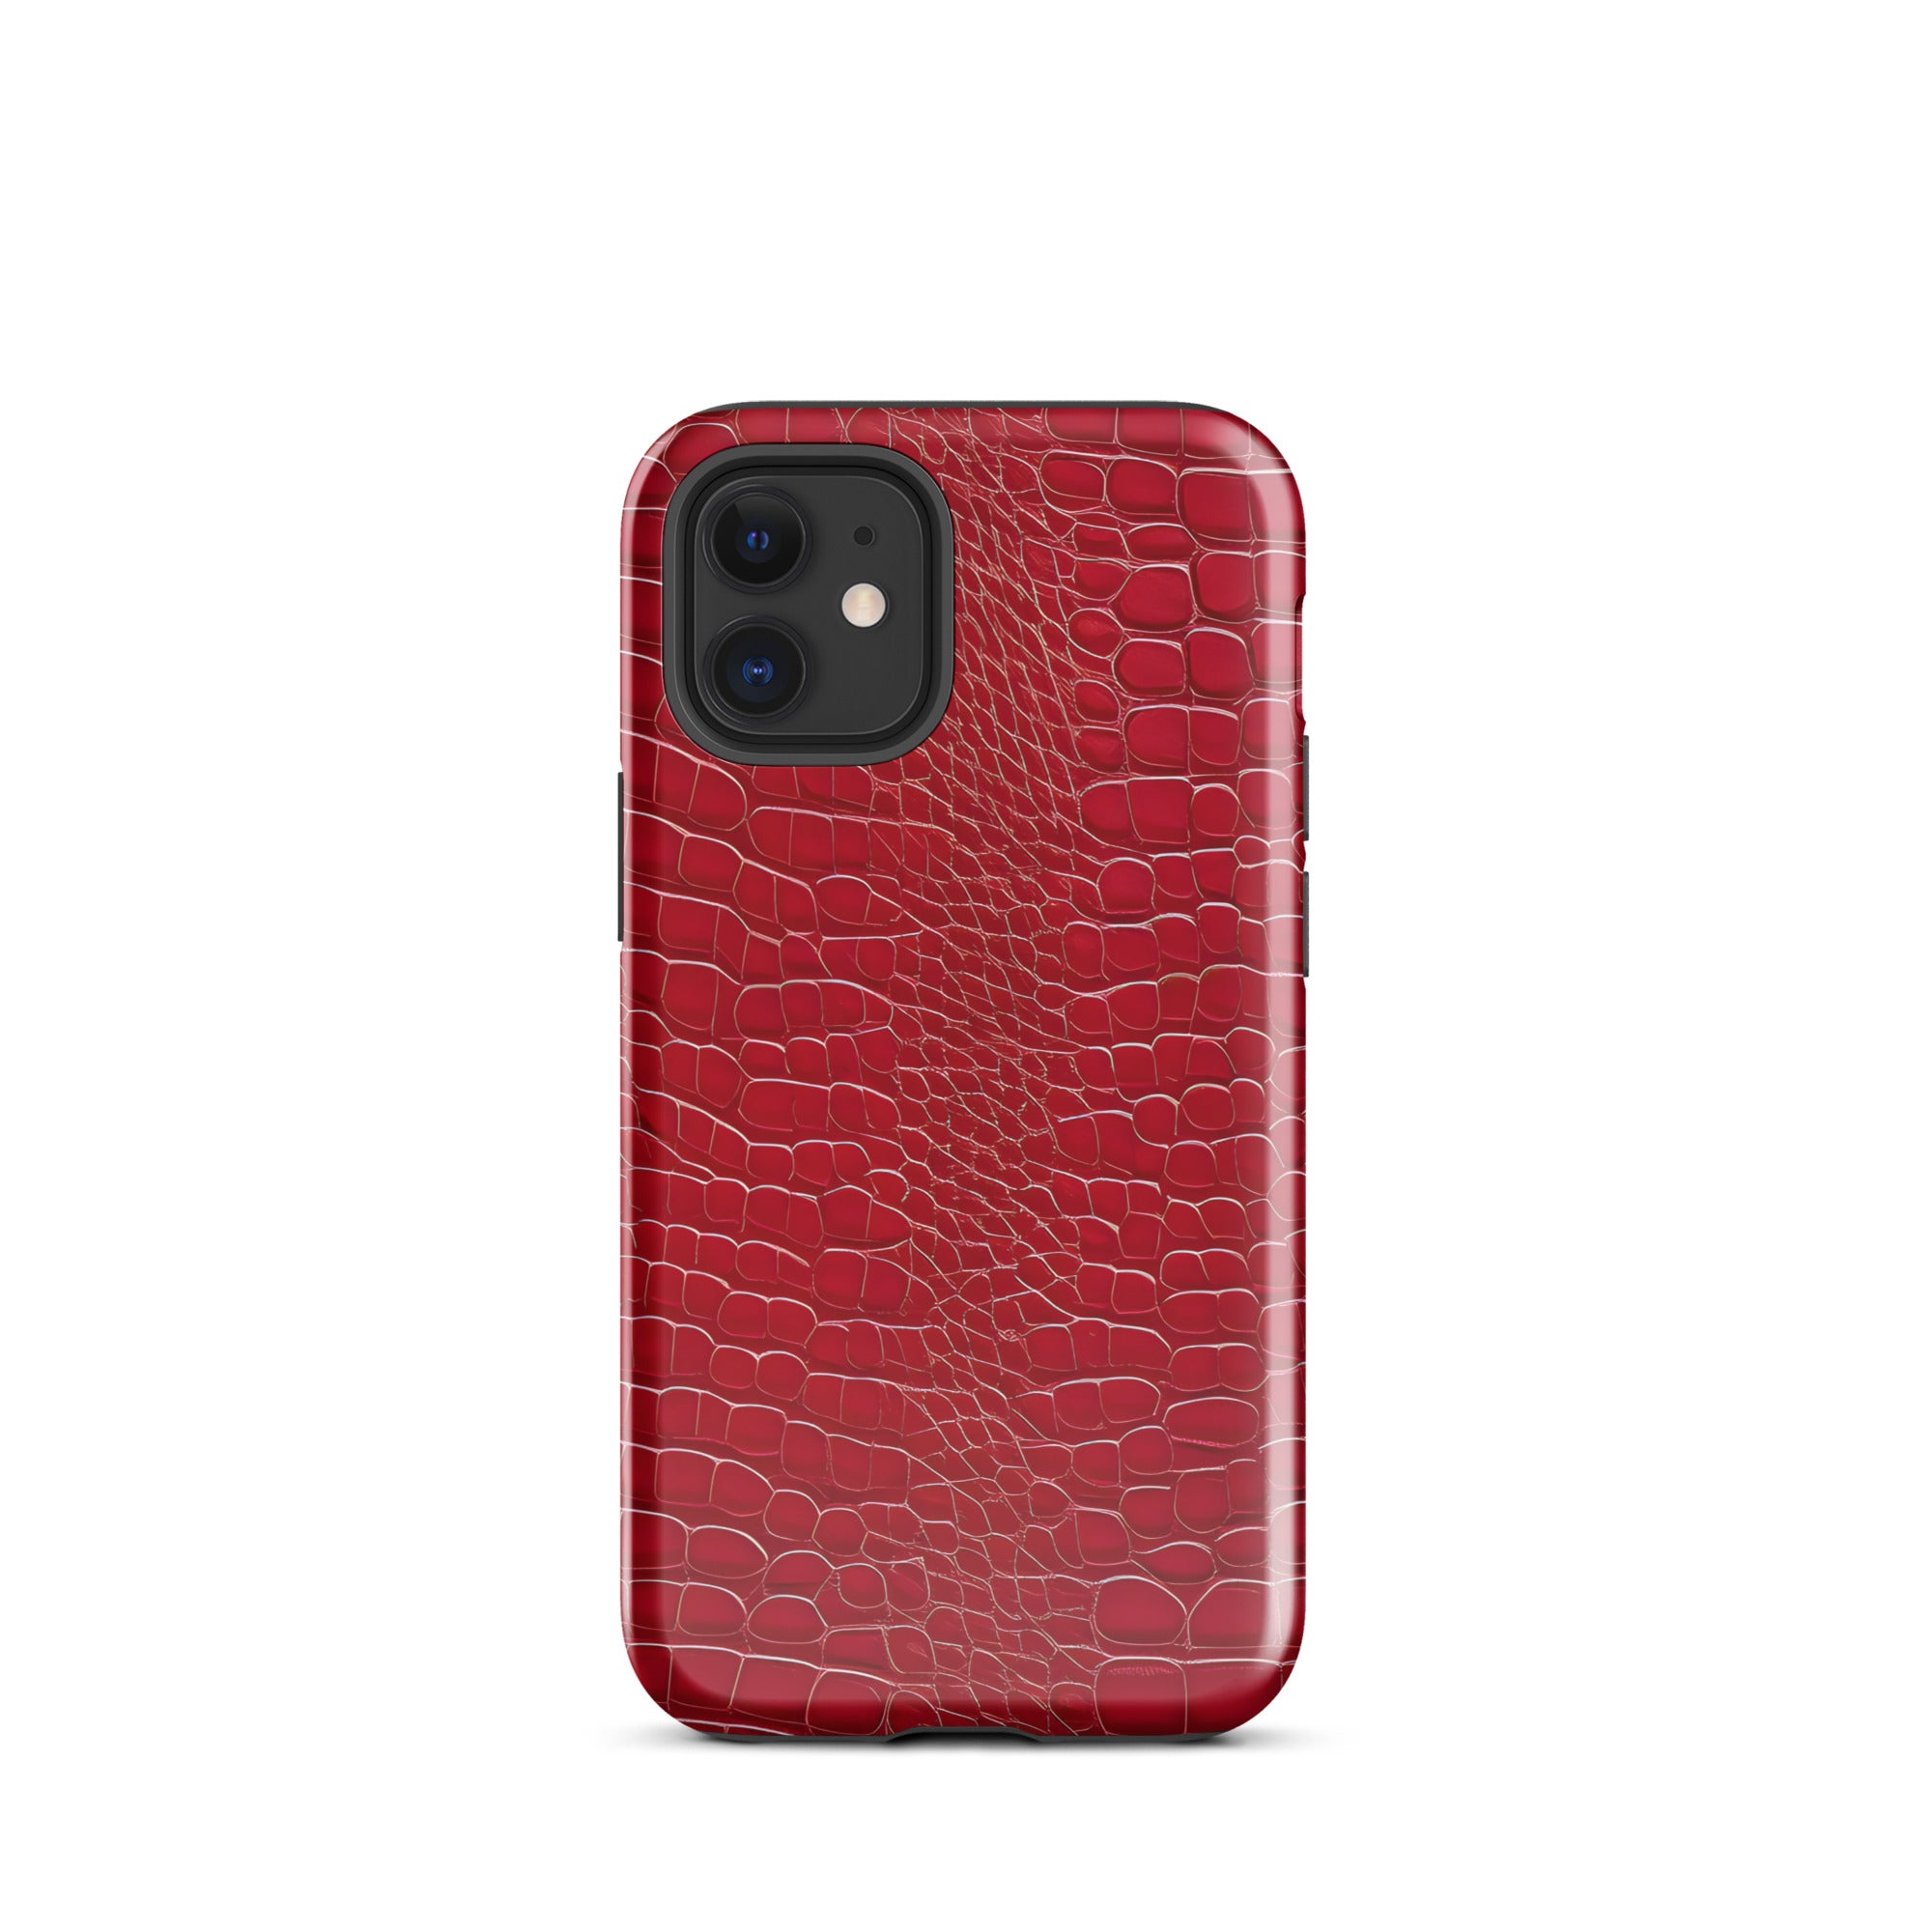 tough-case-for-iphone-glossy-iphone-12-mini-front-656383d5b5660.jpg